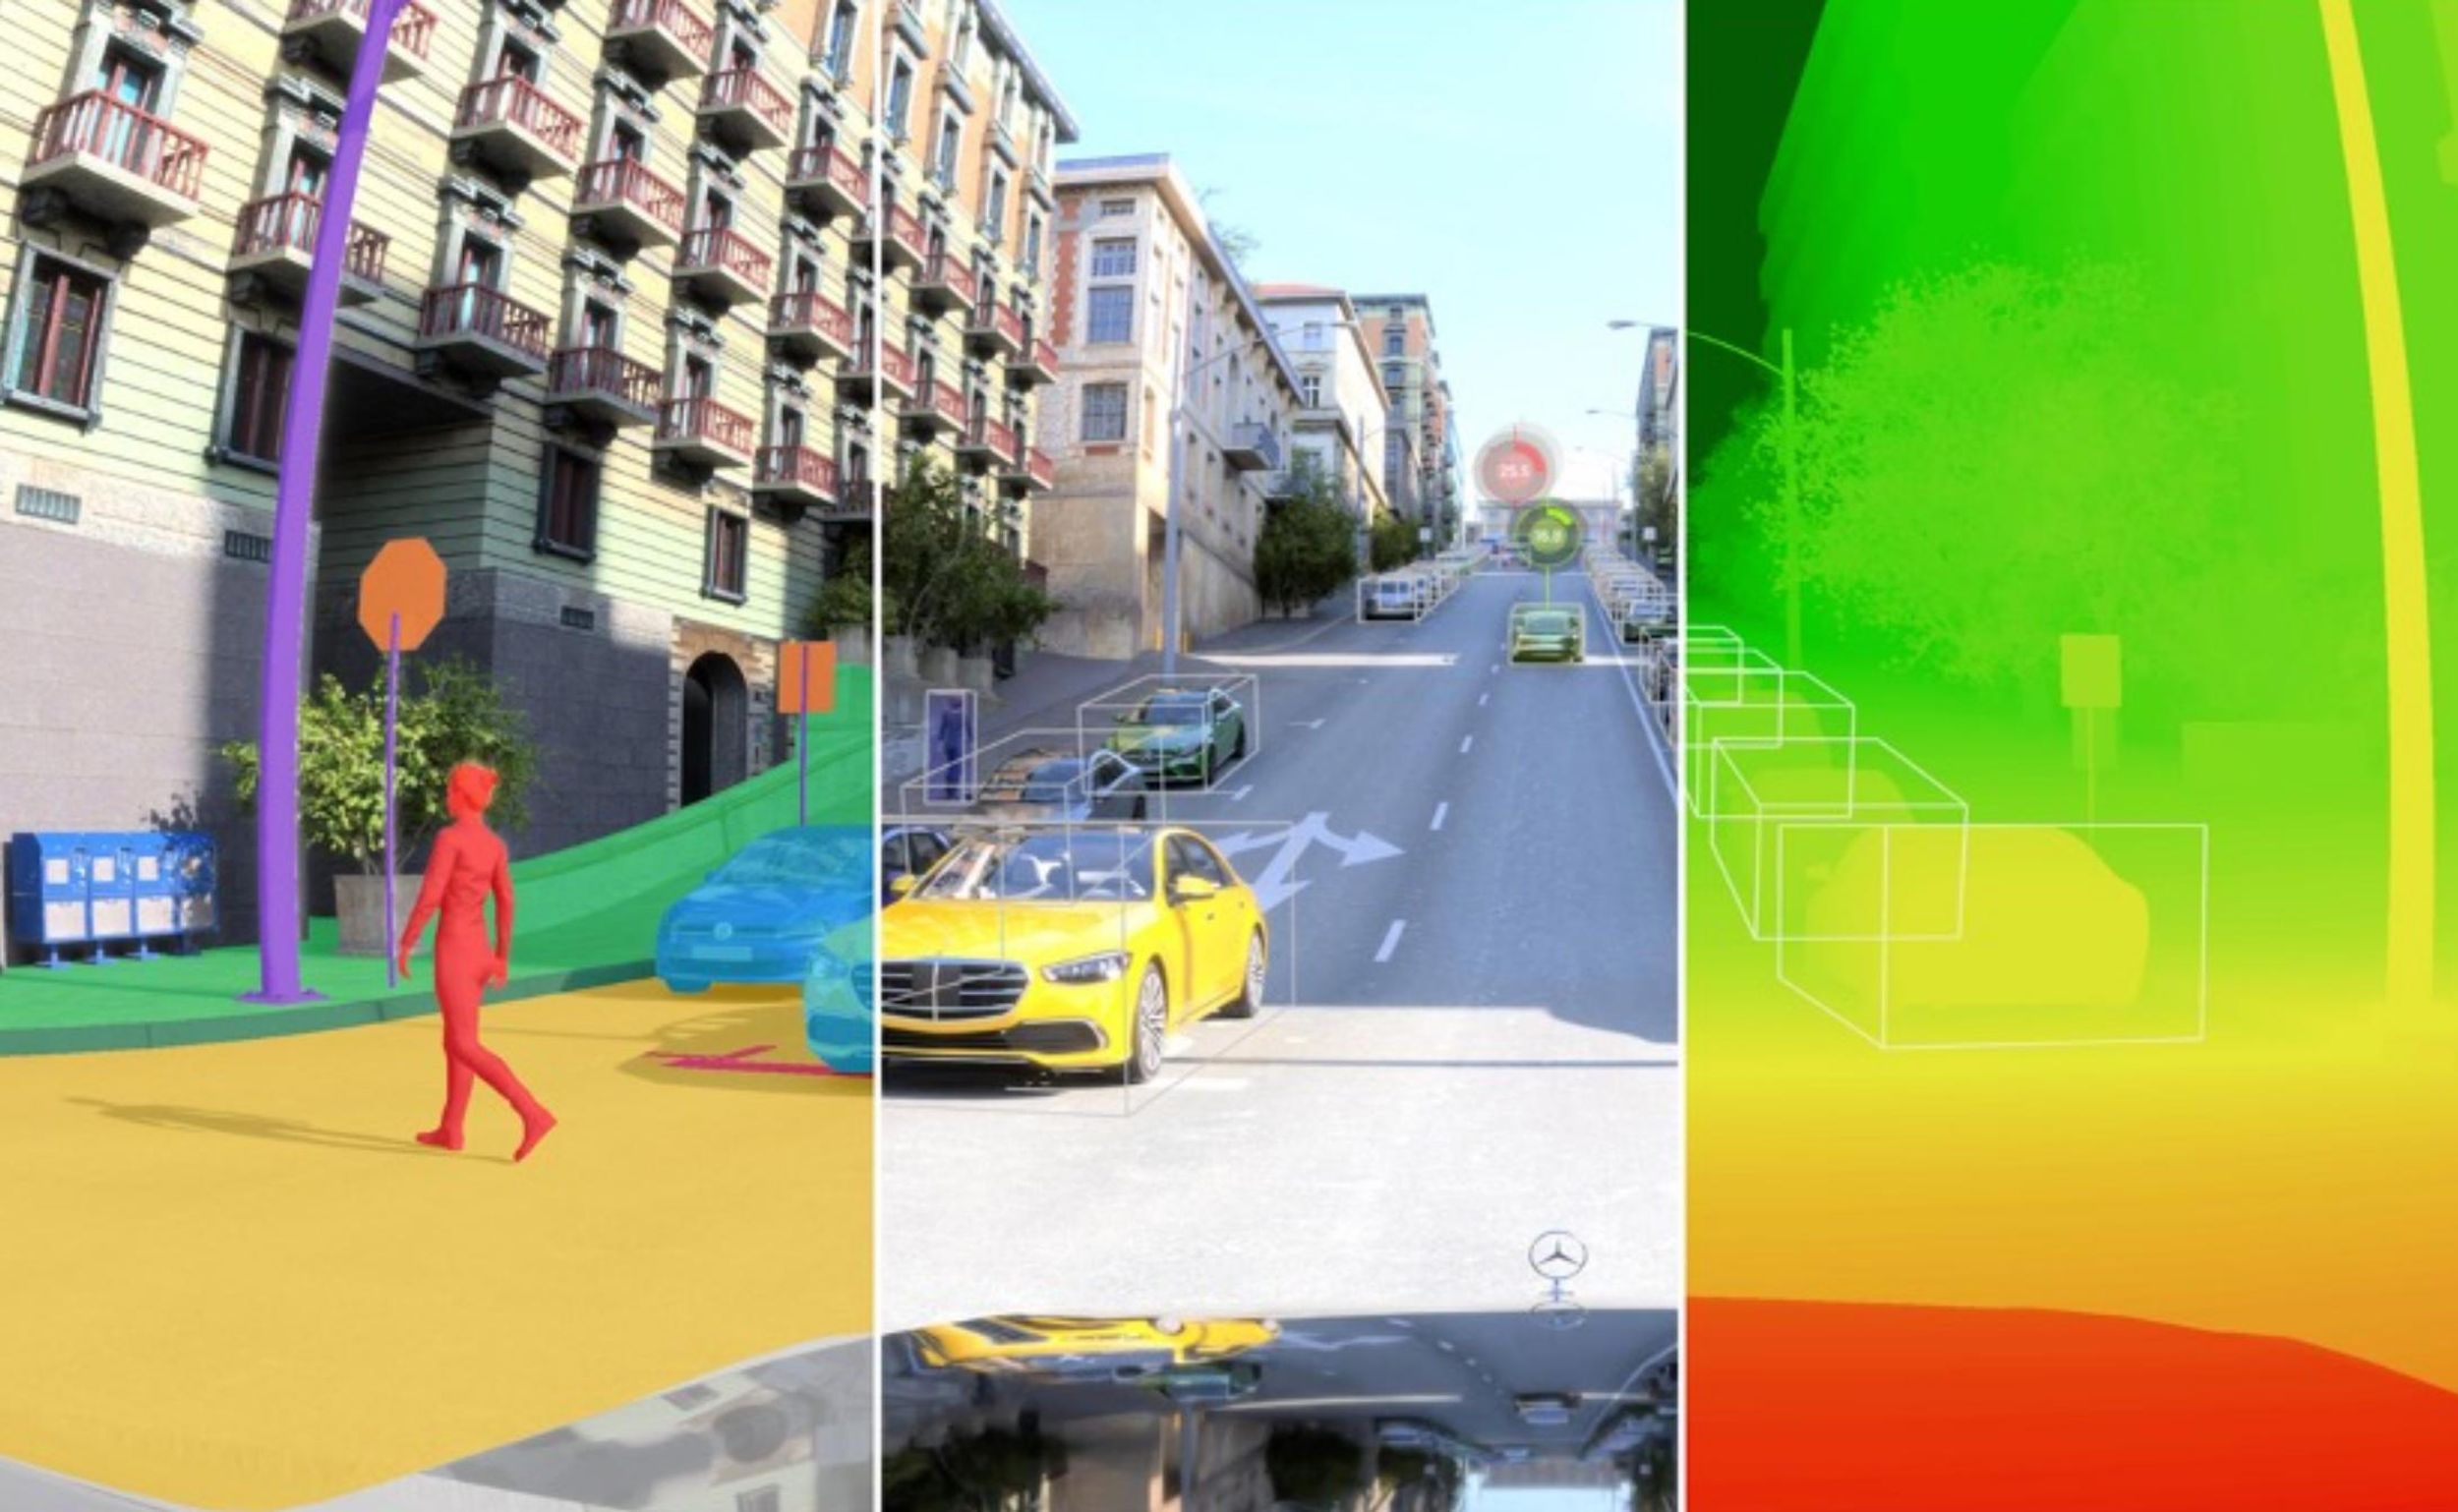 A computer-generated street scene shows cars that are outlined in boxes and a red-colored pedestrian crossing the road.